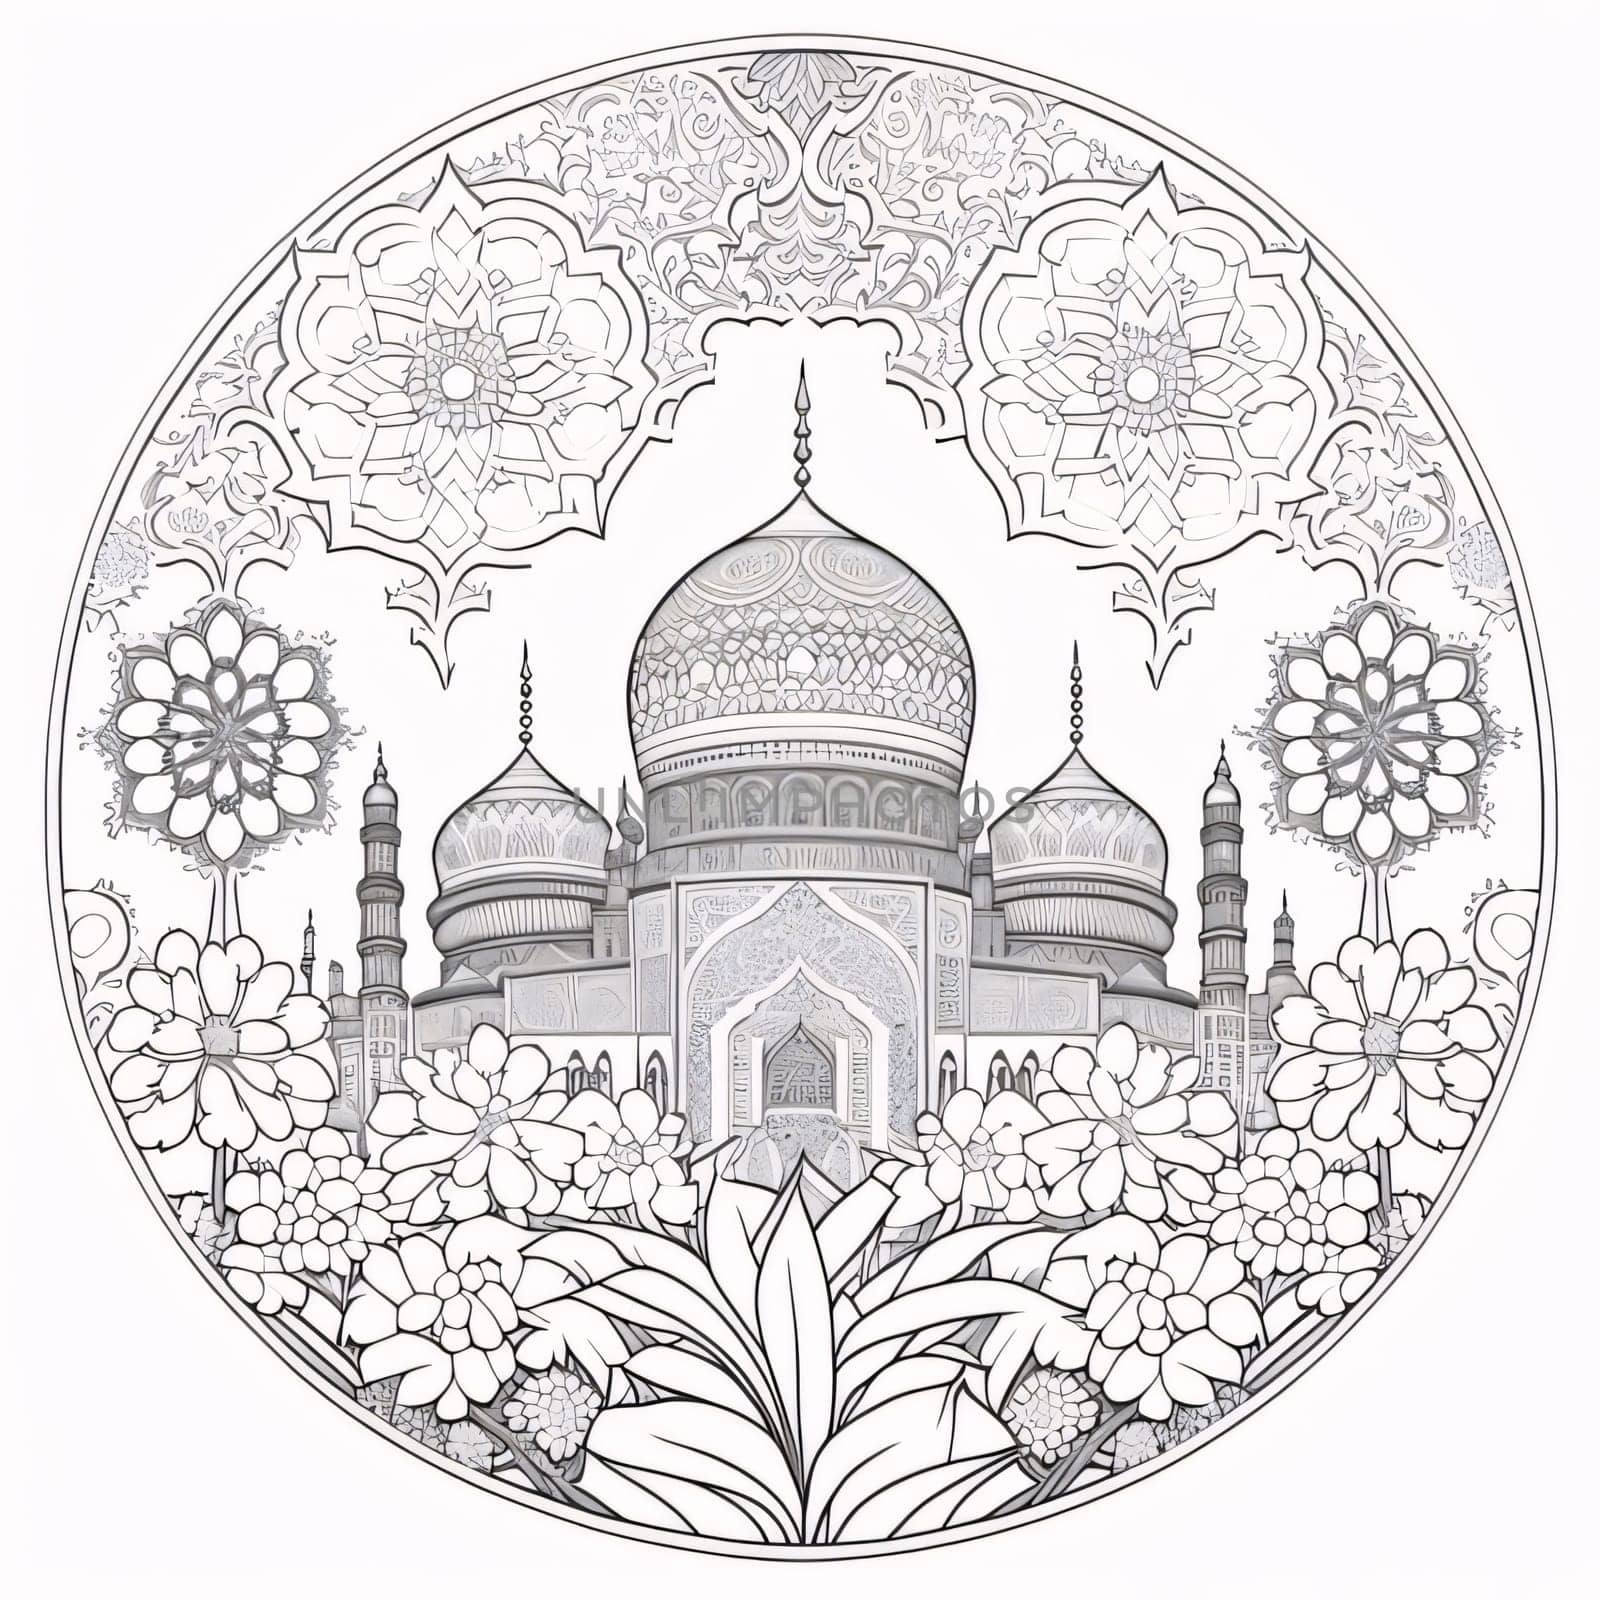 Black and white coloring sheet of a mosque in a circle. Mosque as a place of prayer for Muslims. A time to meet with Allah.